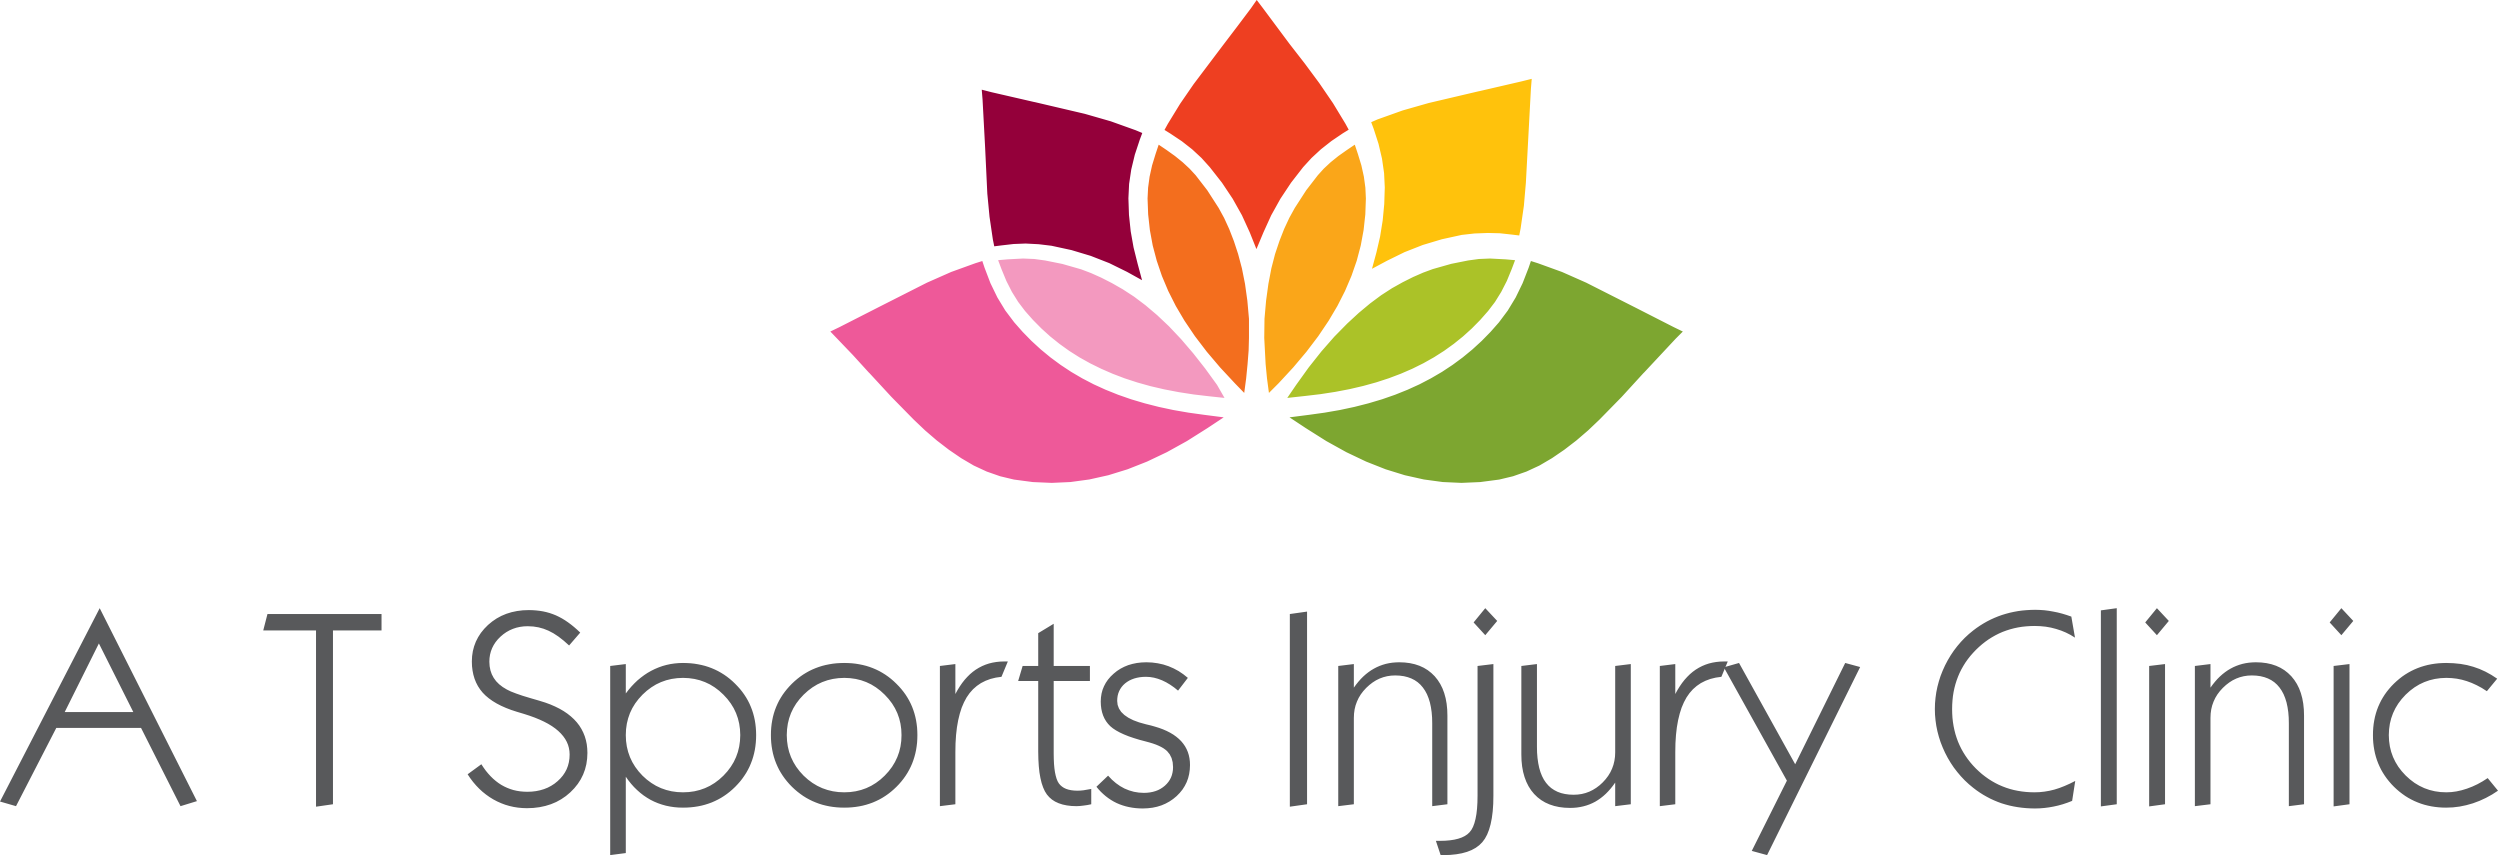 58 Best Images Sports Injury Clinic Singapore - Optimum Sports Injury Clinic in Carlisle • Read 1 Review